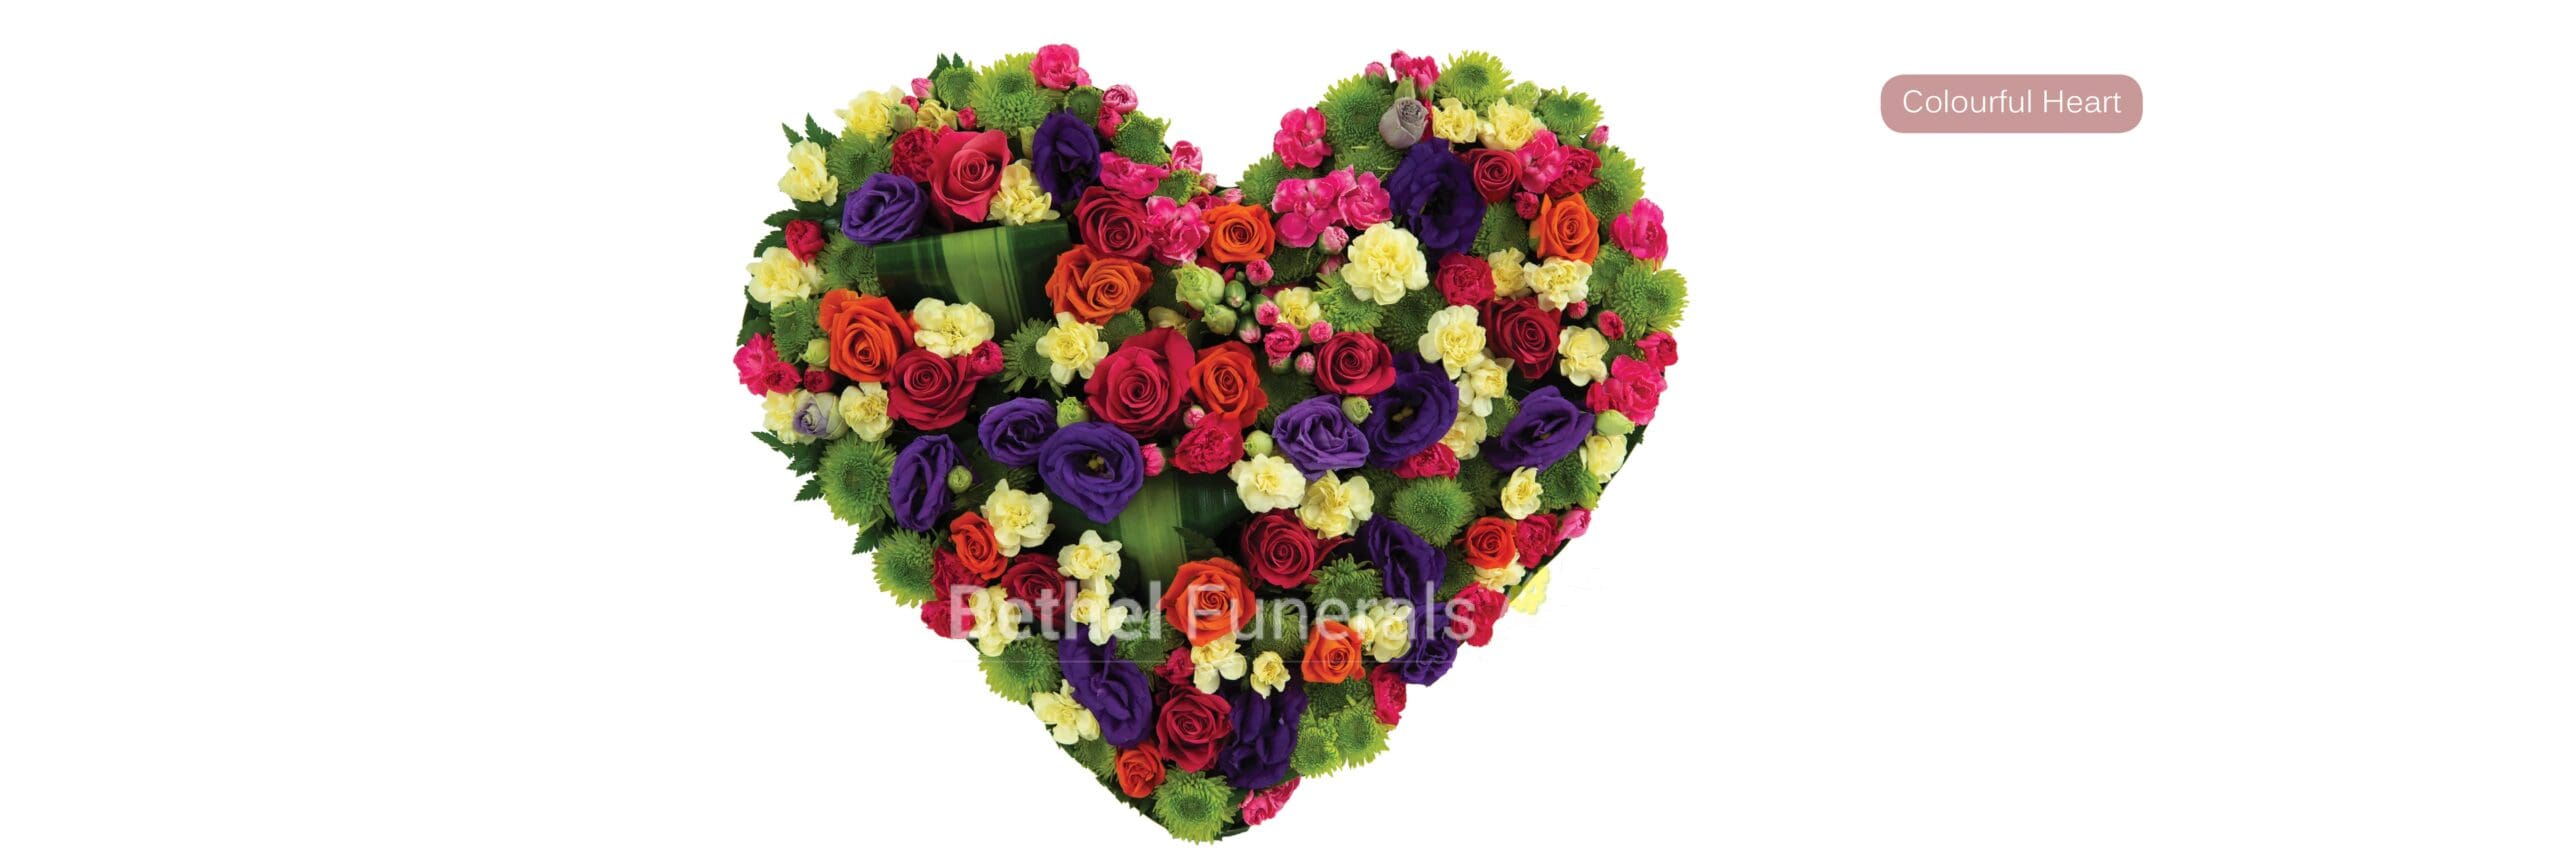 colourful heart funeral flowers